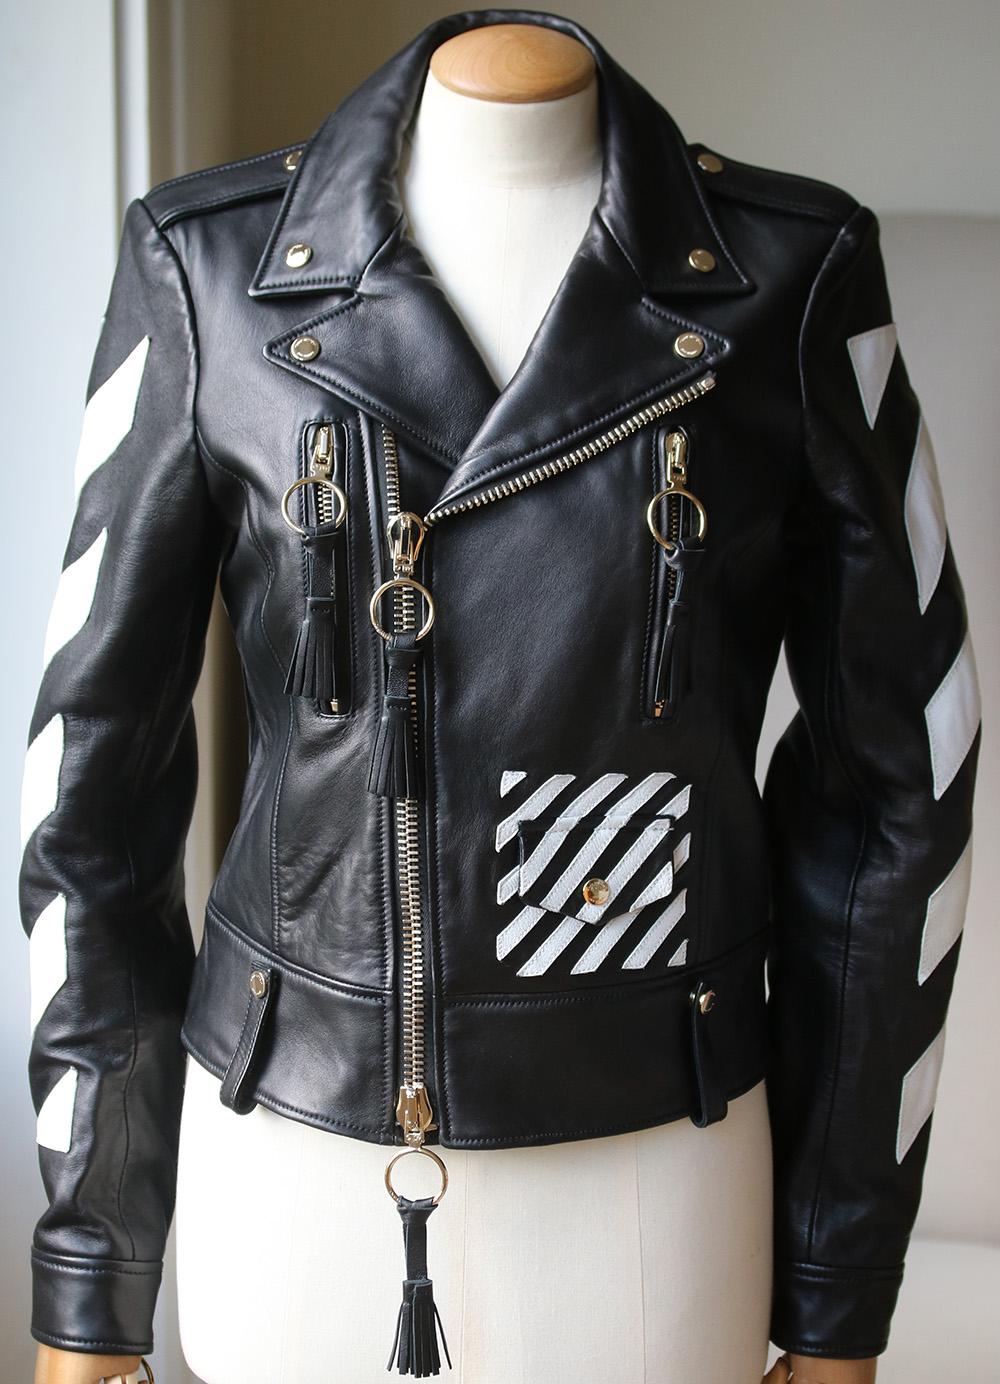 Virgil Abloh - also Kanye West's Creative Director - creates pieces inspired by youth culture and streetwear for his cult brand Off-White. Immaculately crafted from supple black leather, this biker jacket features signature diagonal striping and the